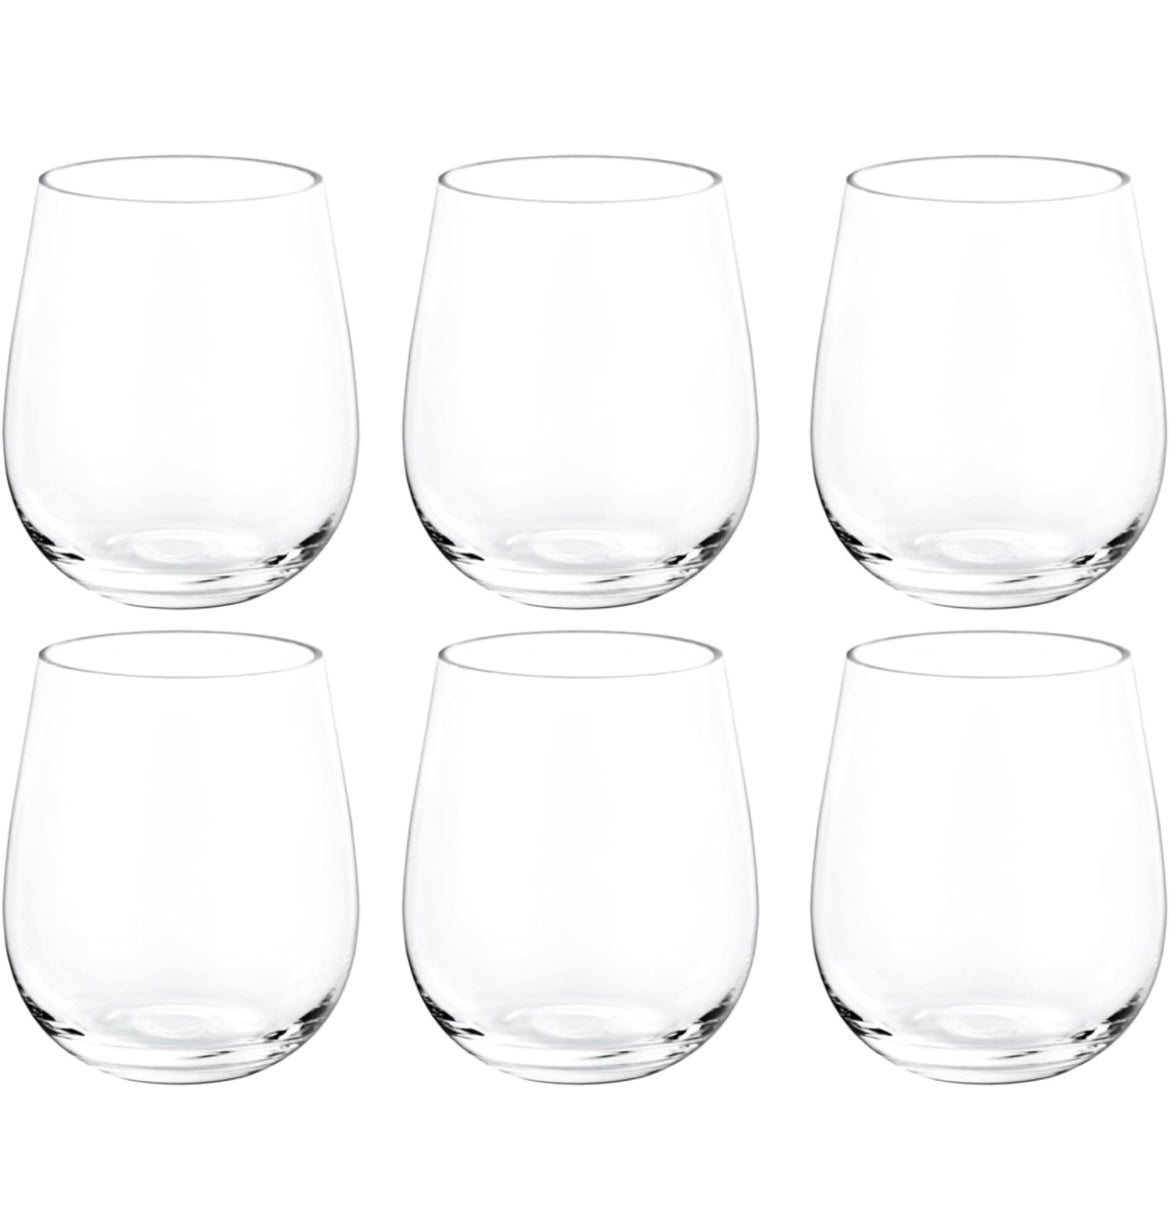 KOXIN-KARLU Classic 18-ounce Acrylic Stemless Wine Glasses, Unbreakable Mixed Drinkware Plastic Tumbler, set of 6 Clear